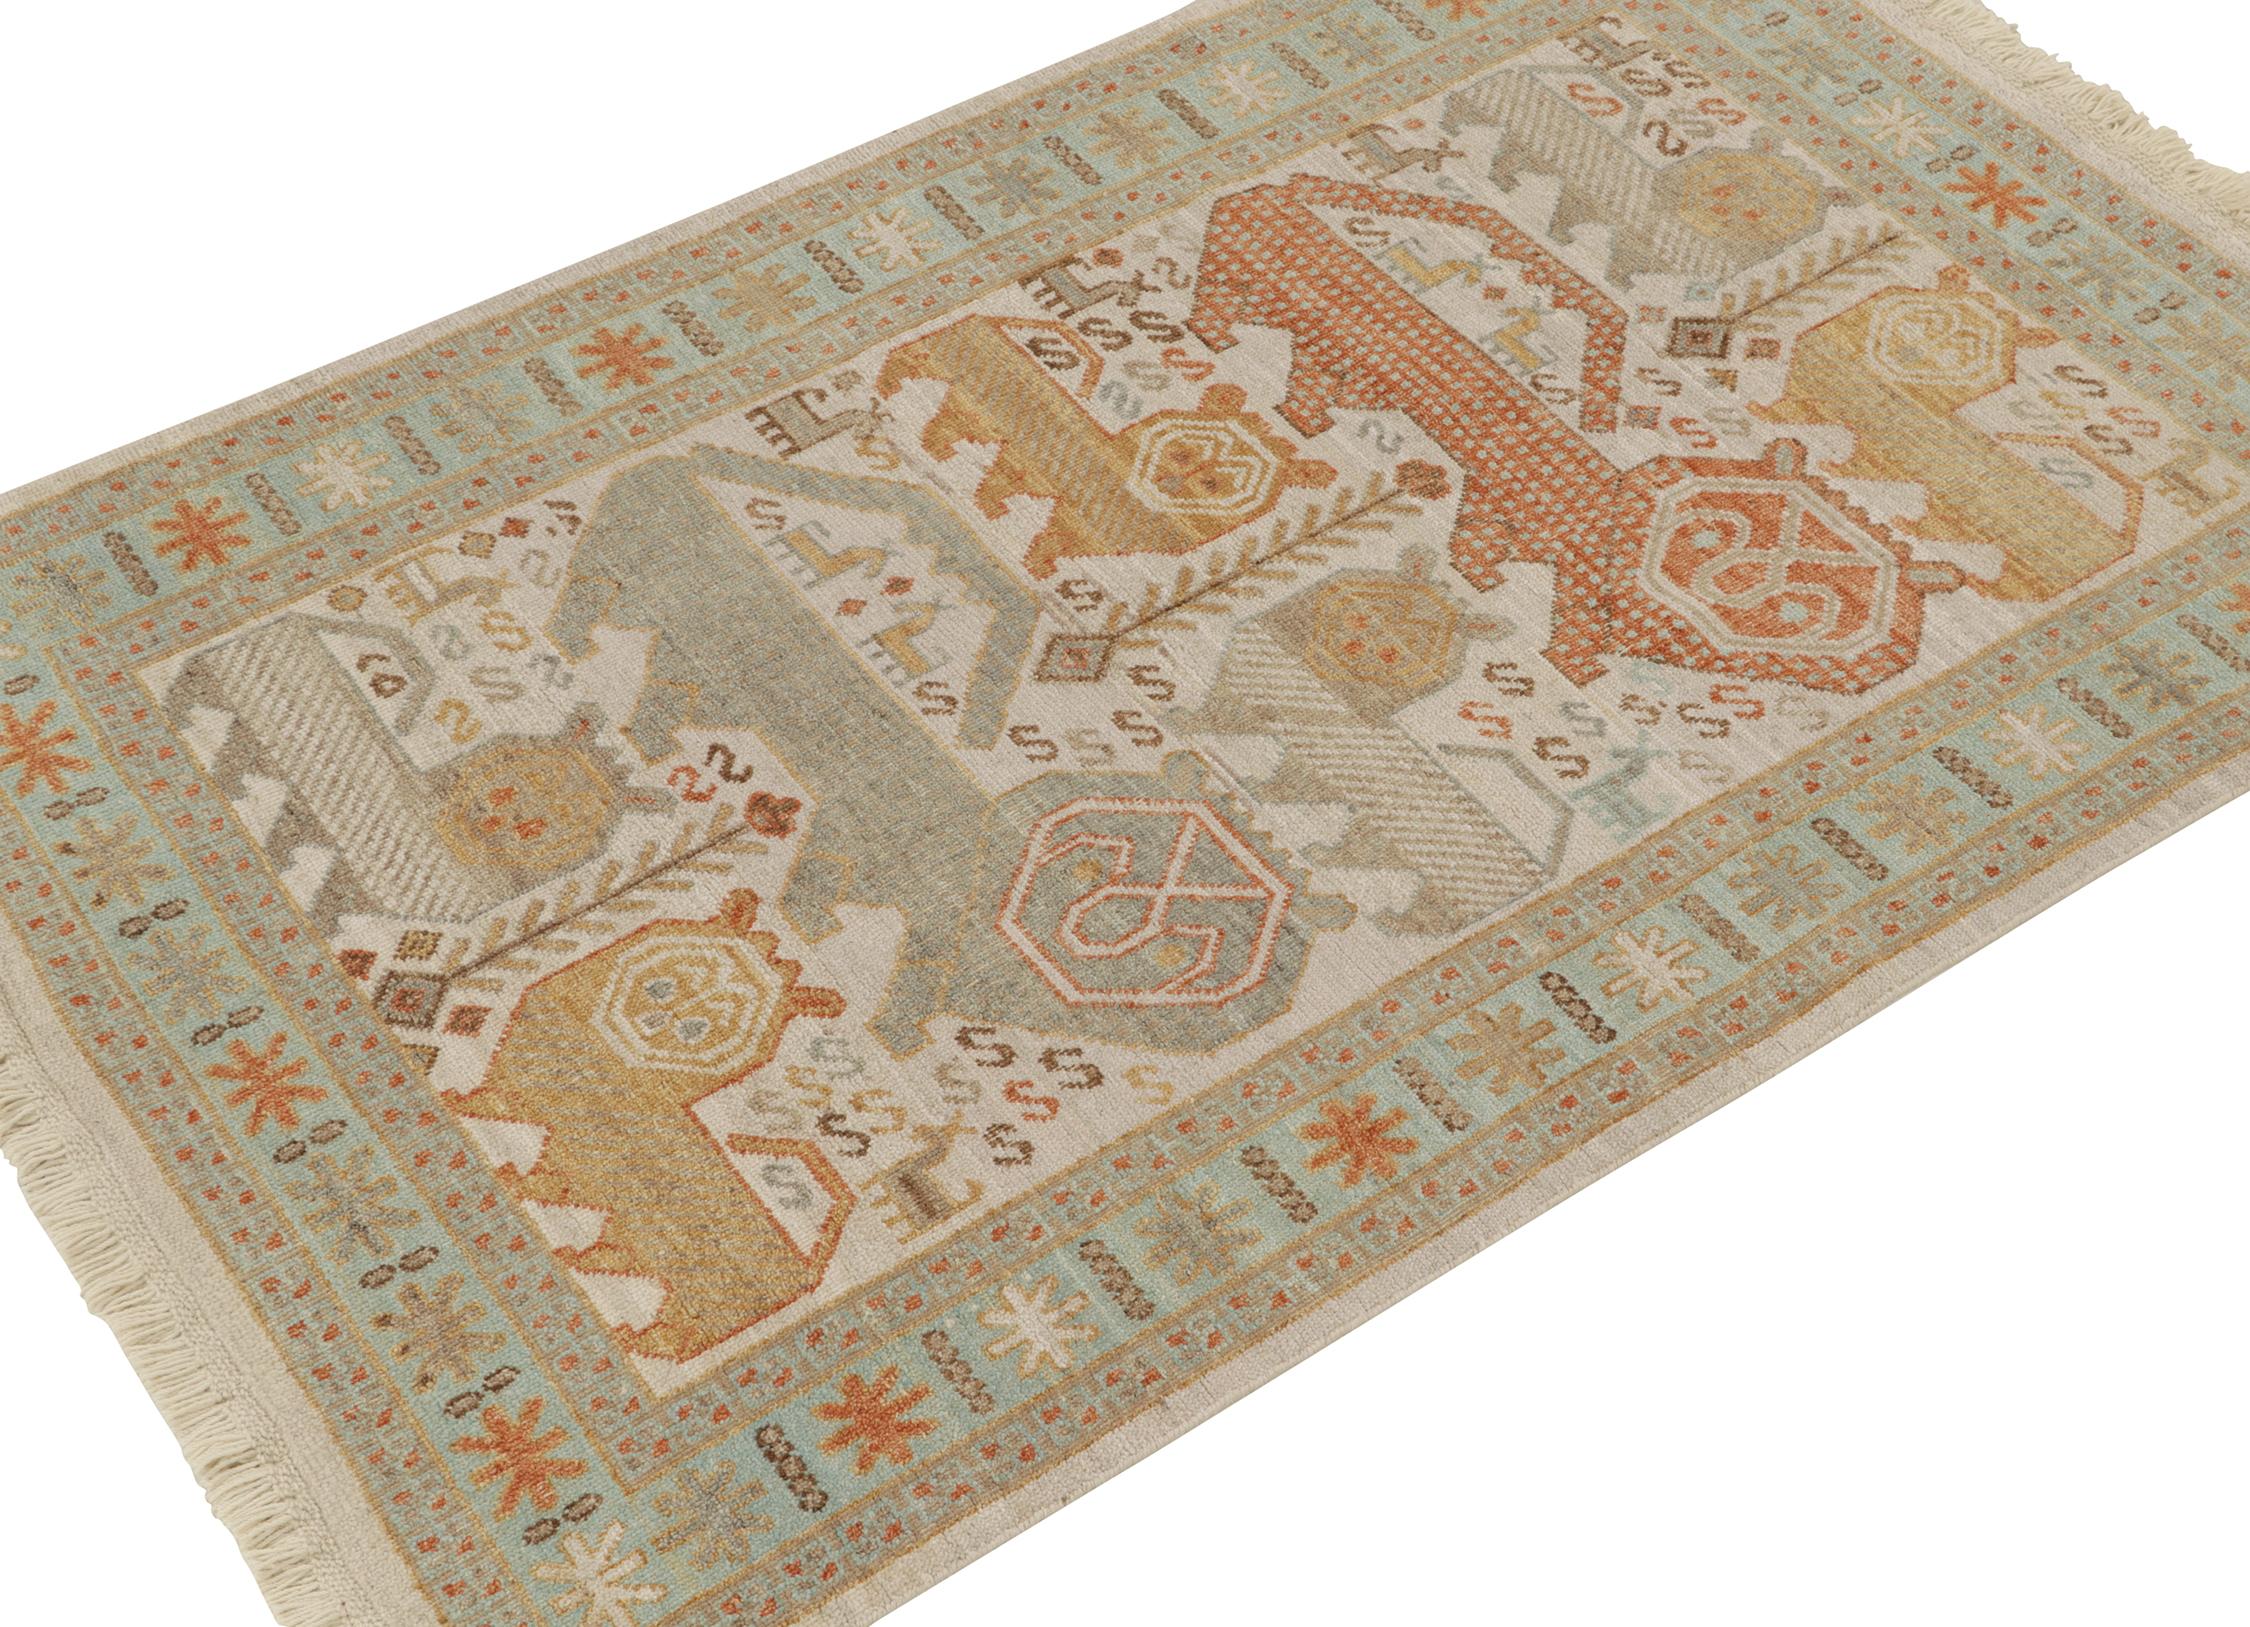 Hand-knotted in wool, a 4x6 ode to classic Caucasian rug aesthetics—from Rug & Kilim’s extensive Burano Collection. 

The carpet draws on tribal lion pictorials in warm, rusty red and light blue atop beige-brown. Keen-eyed connoisseurs will admire